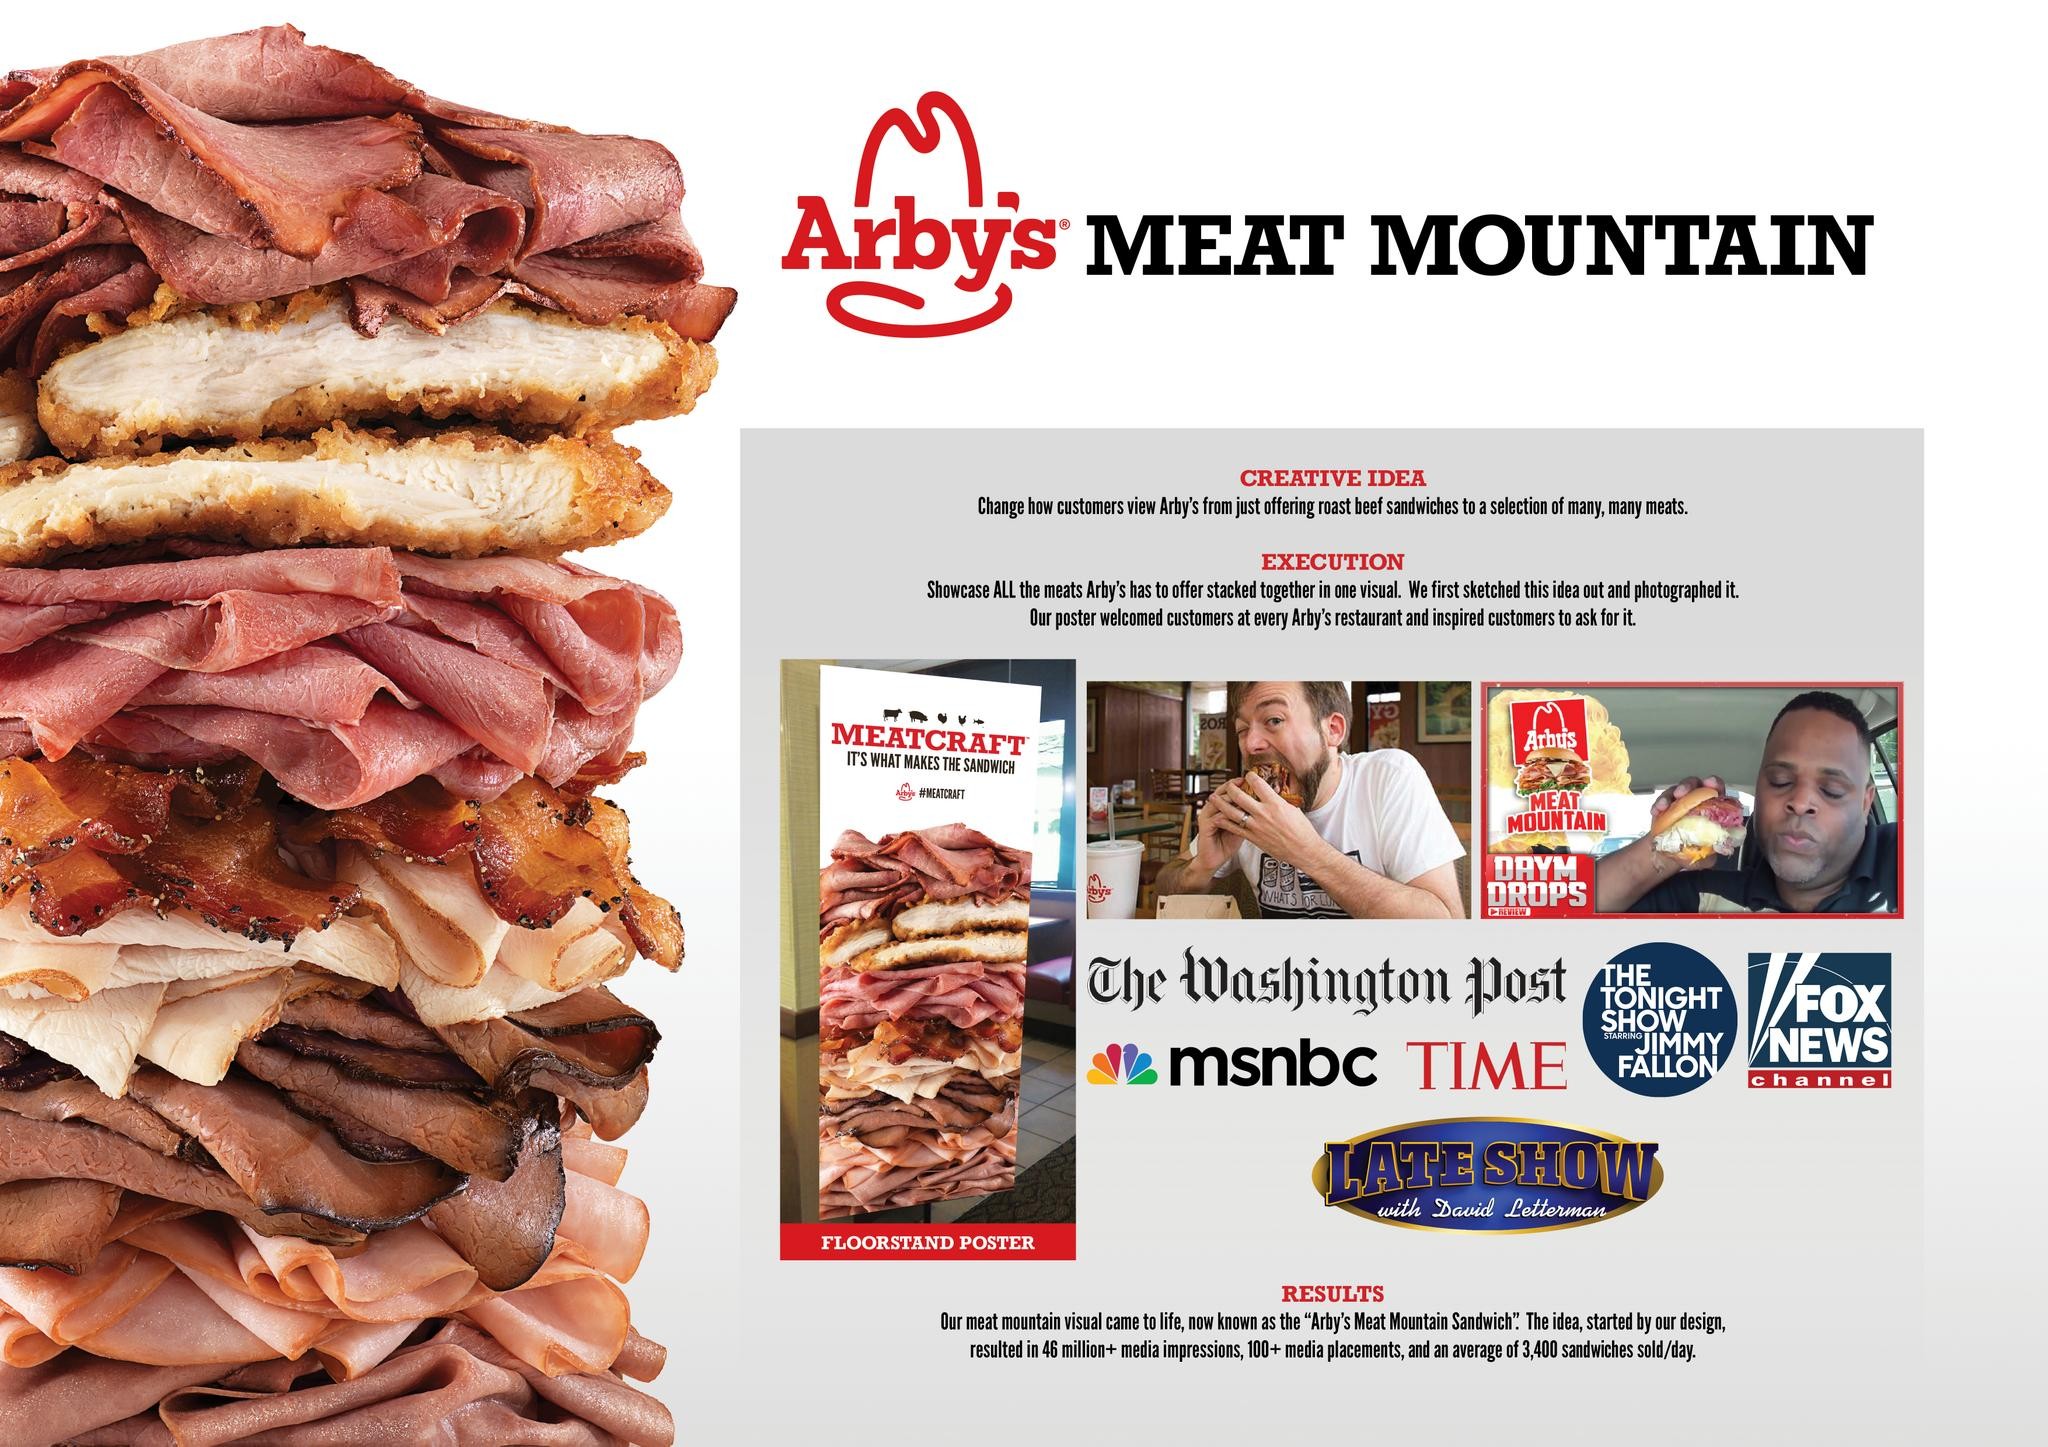 ARBY'S MEAT MOUNTAIN: FROM INSPIRATIONAL IDEA TO MONUMENTAL MEDIA SENSATION